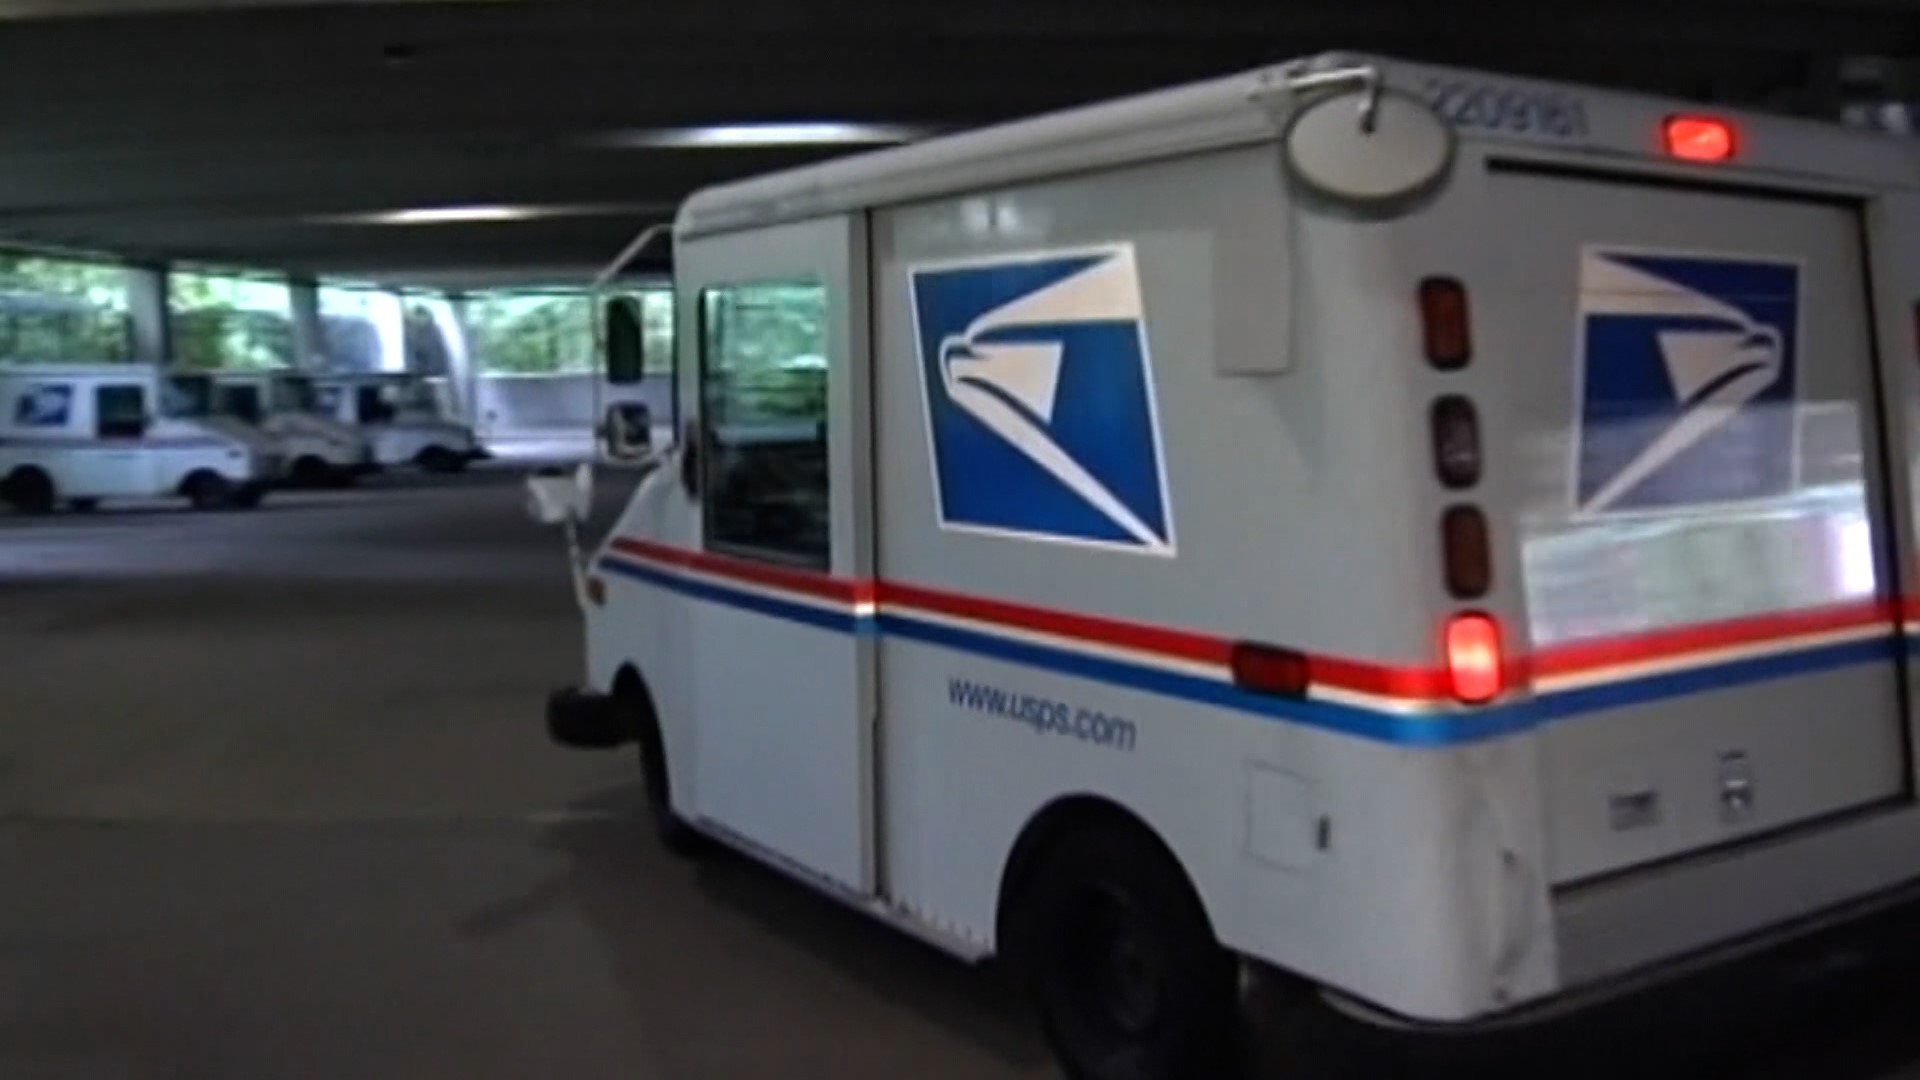 U.S. Postal Inspector John Wiegand says if you are missing mail or feel your mail may have been stolen to reach out at 1-877-876-2455 or online at uspis.gov